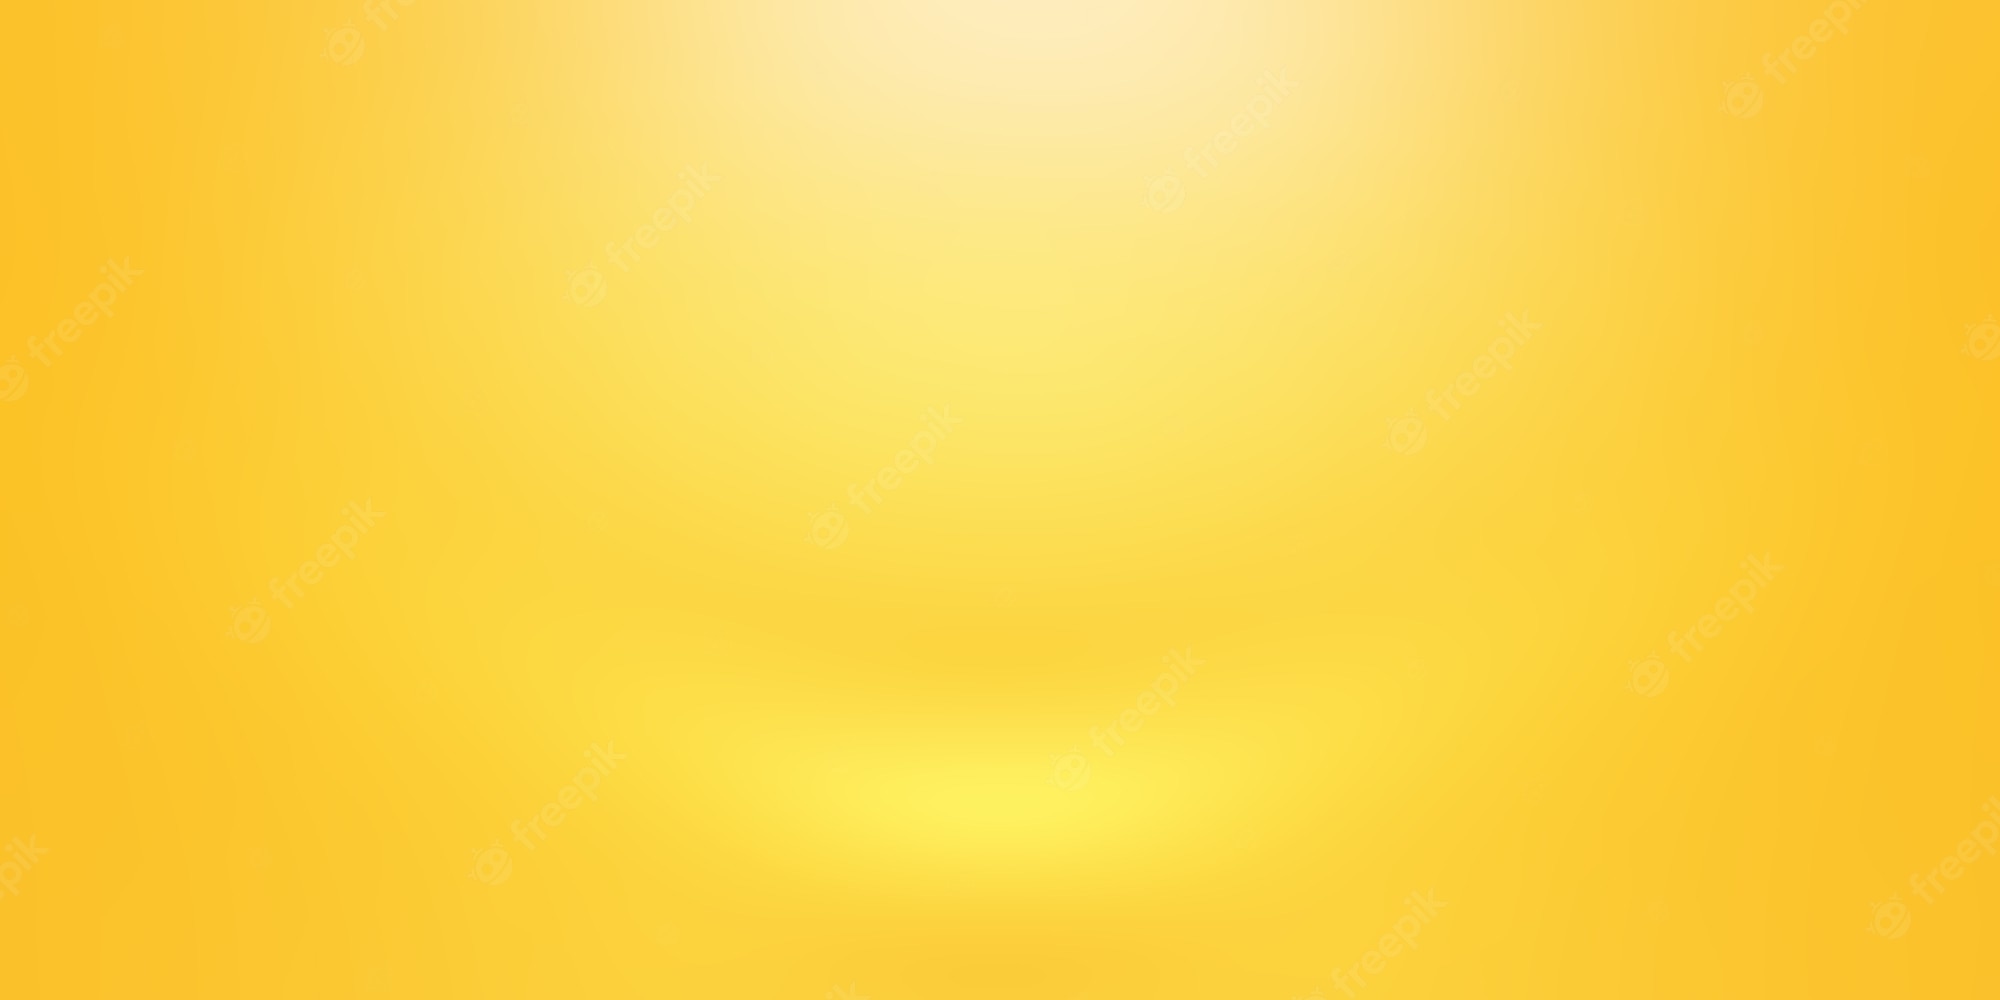 Yellow Background Image. Free Vectors, & PSD